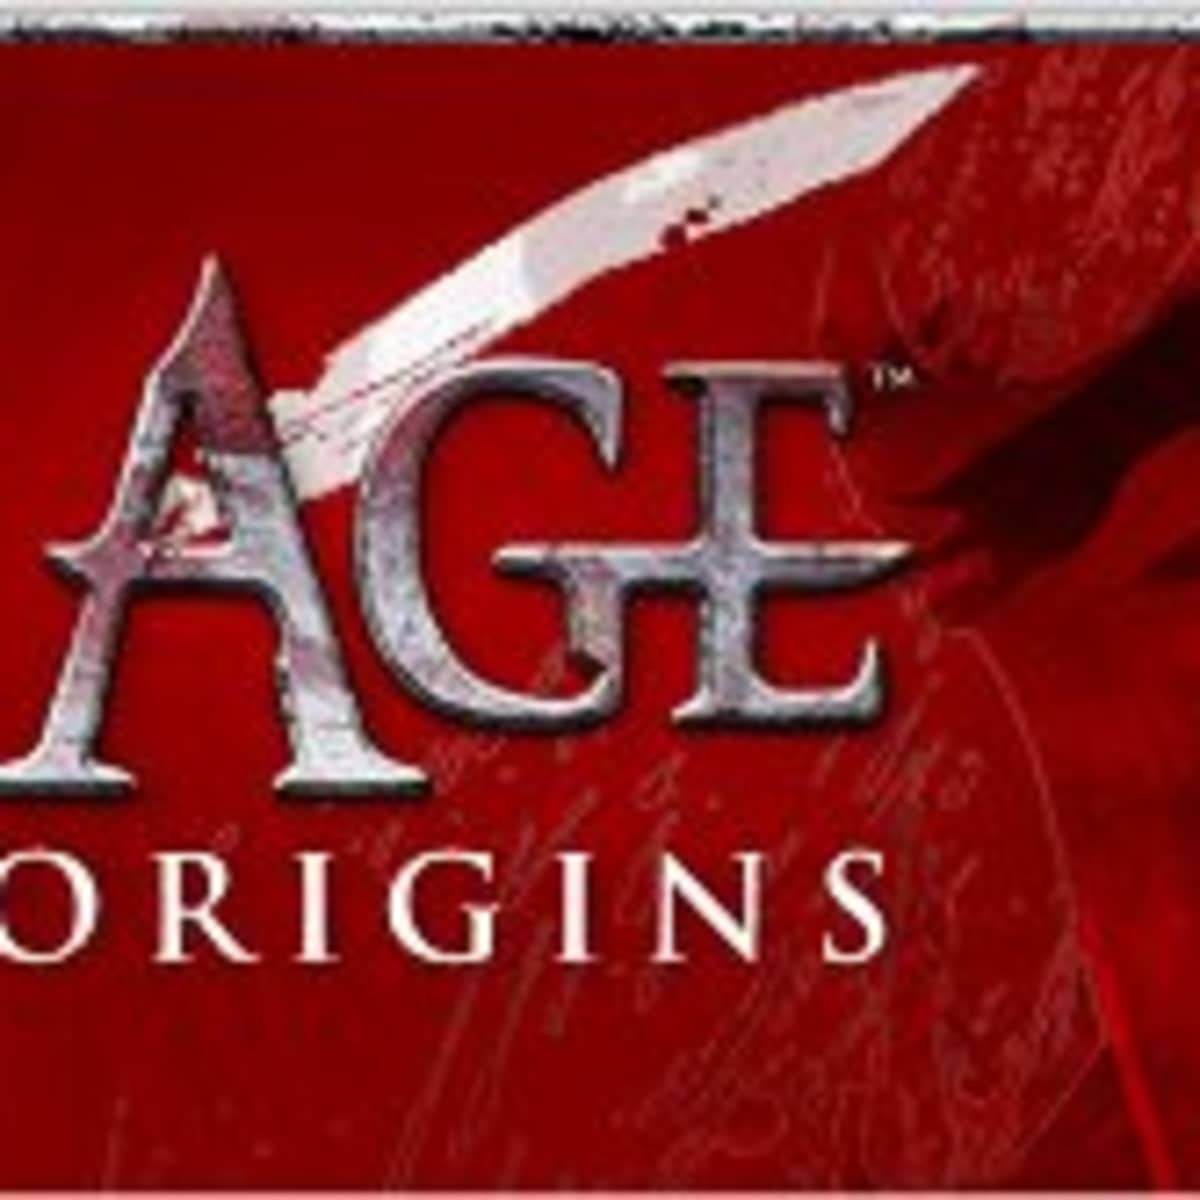 Dragon Age Origins: A guide to romance - HubPages